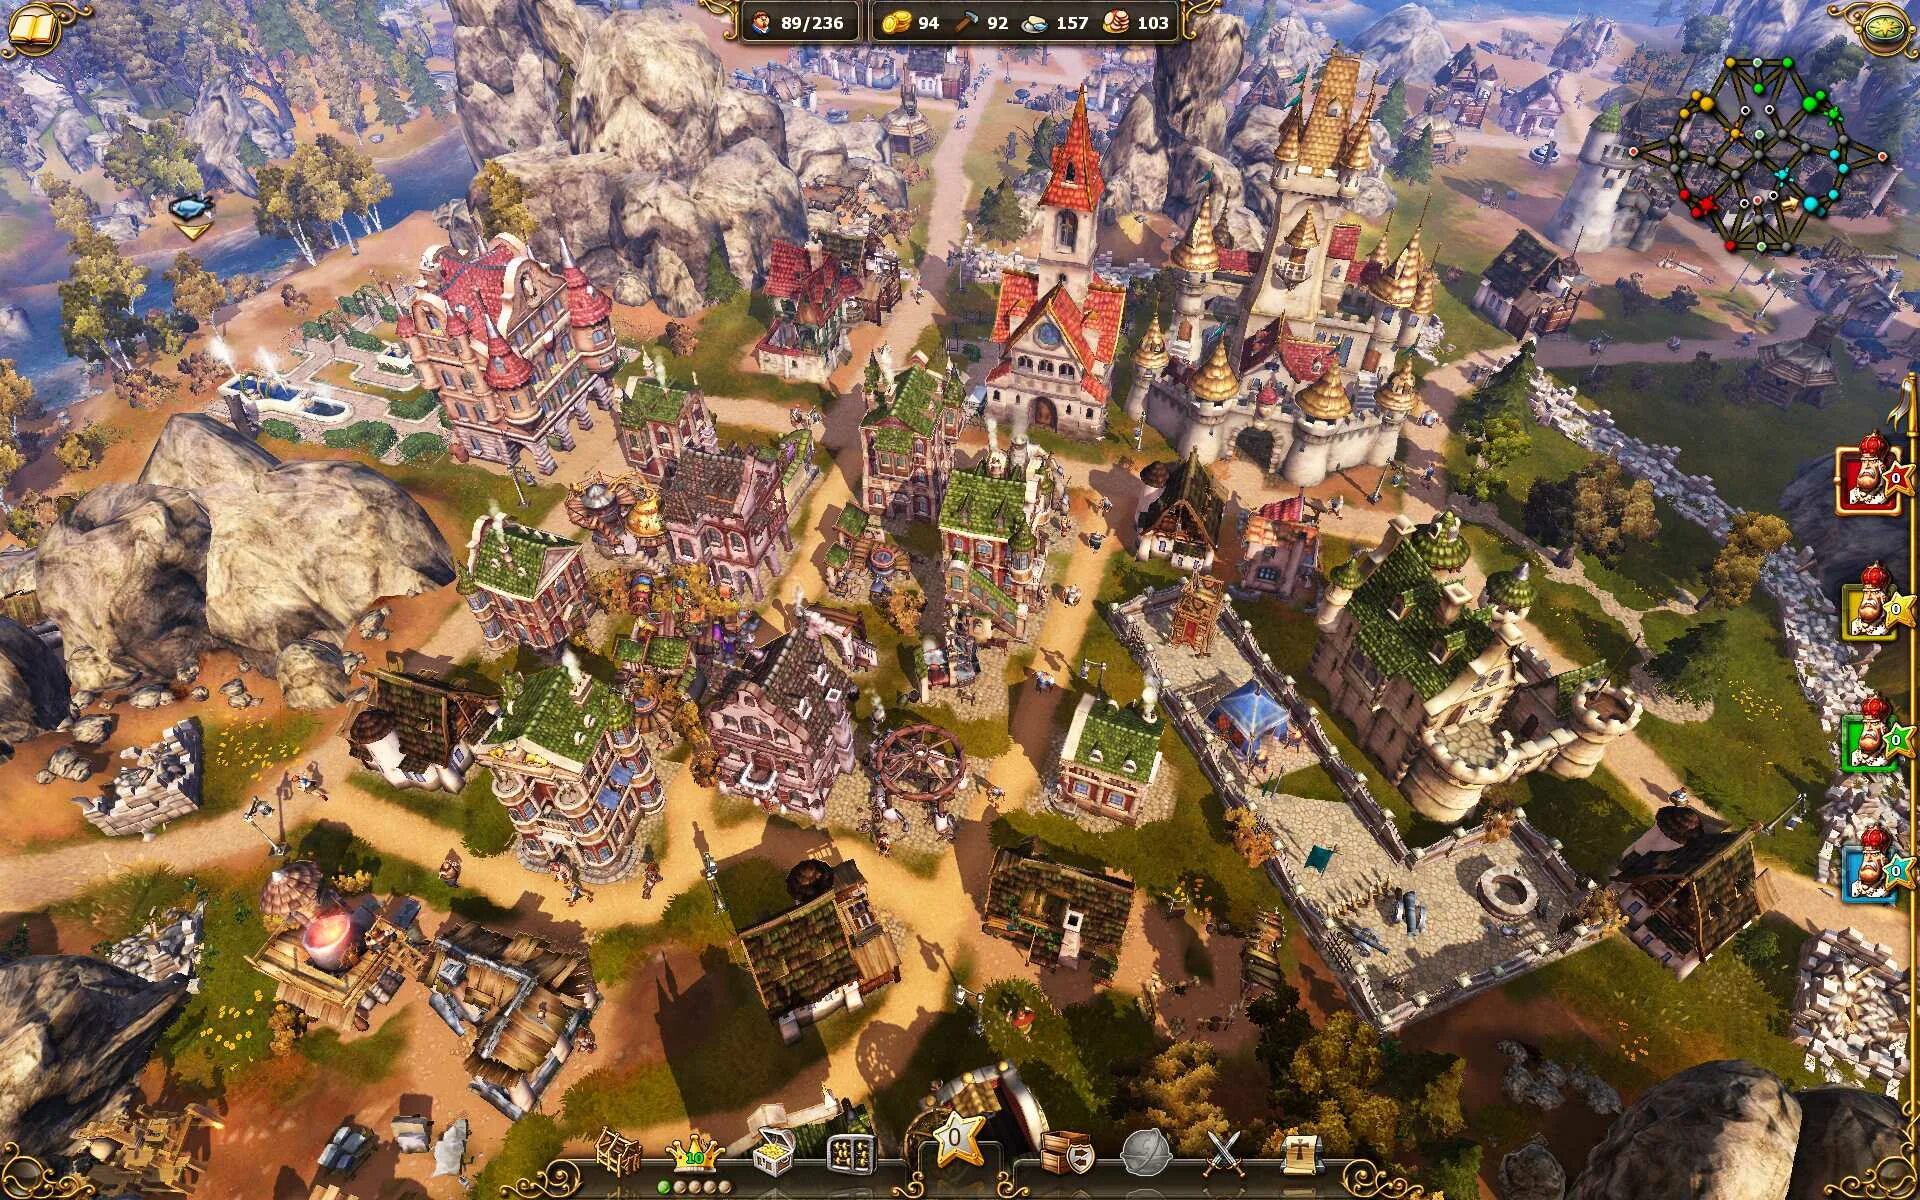 Игра Settlers 7. The Settlers 7 Paths to a Kingdom. The Settlers 7: History Edition. Settlers 7 золотое издание.